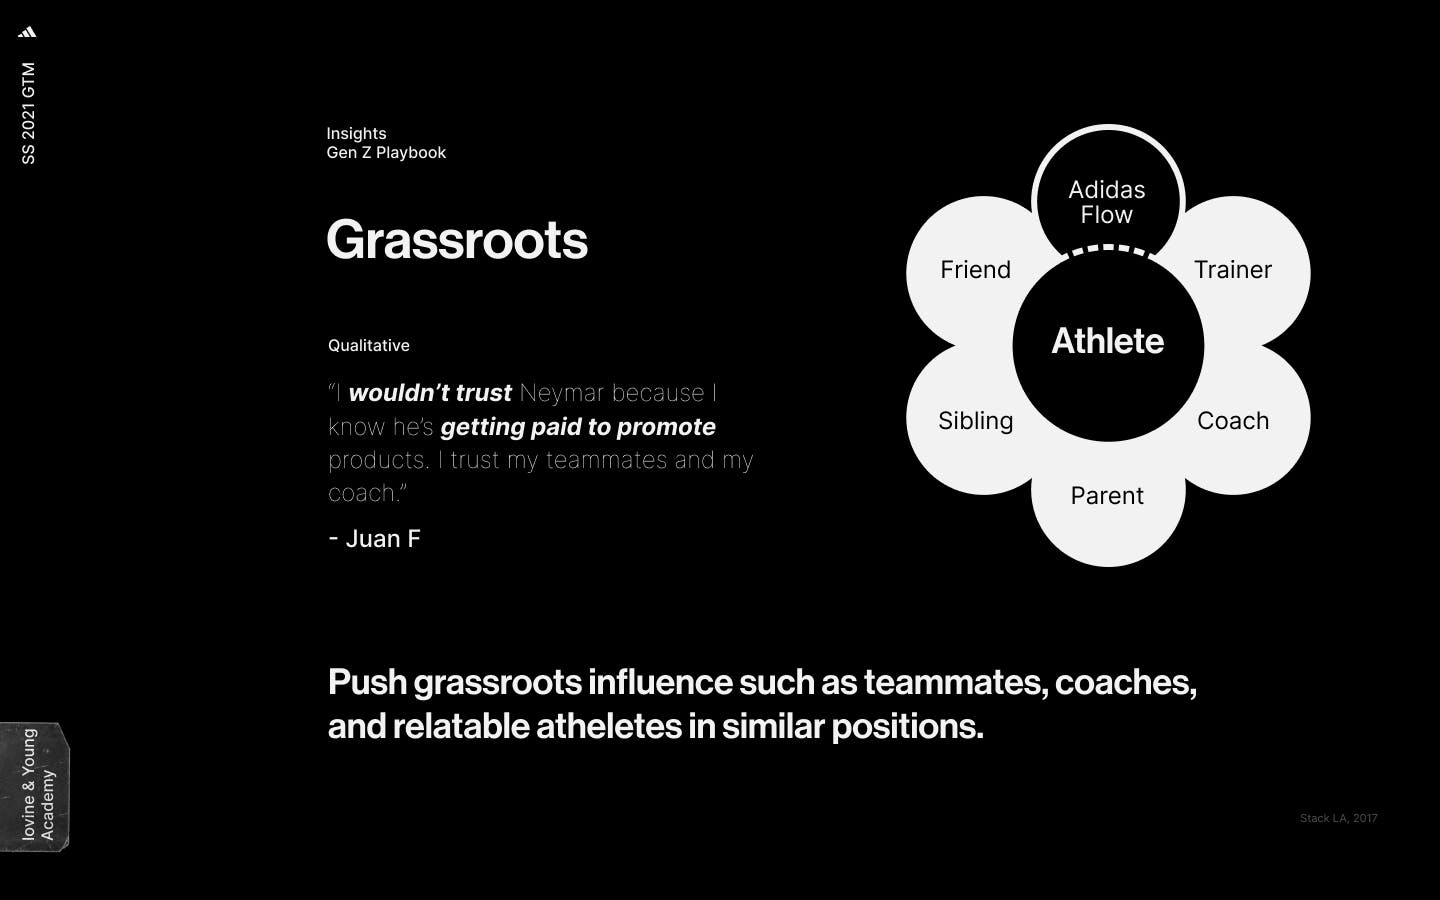 A slide from a marketing pitch showing where young athletes gain trust